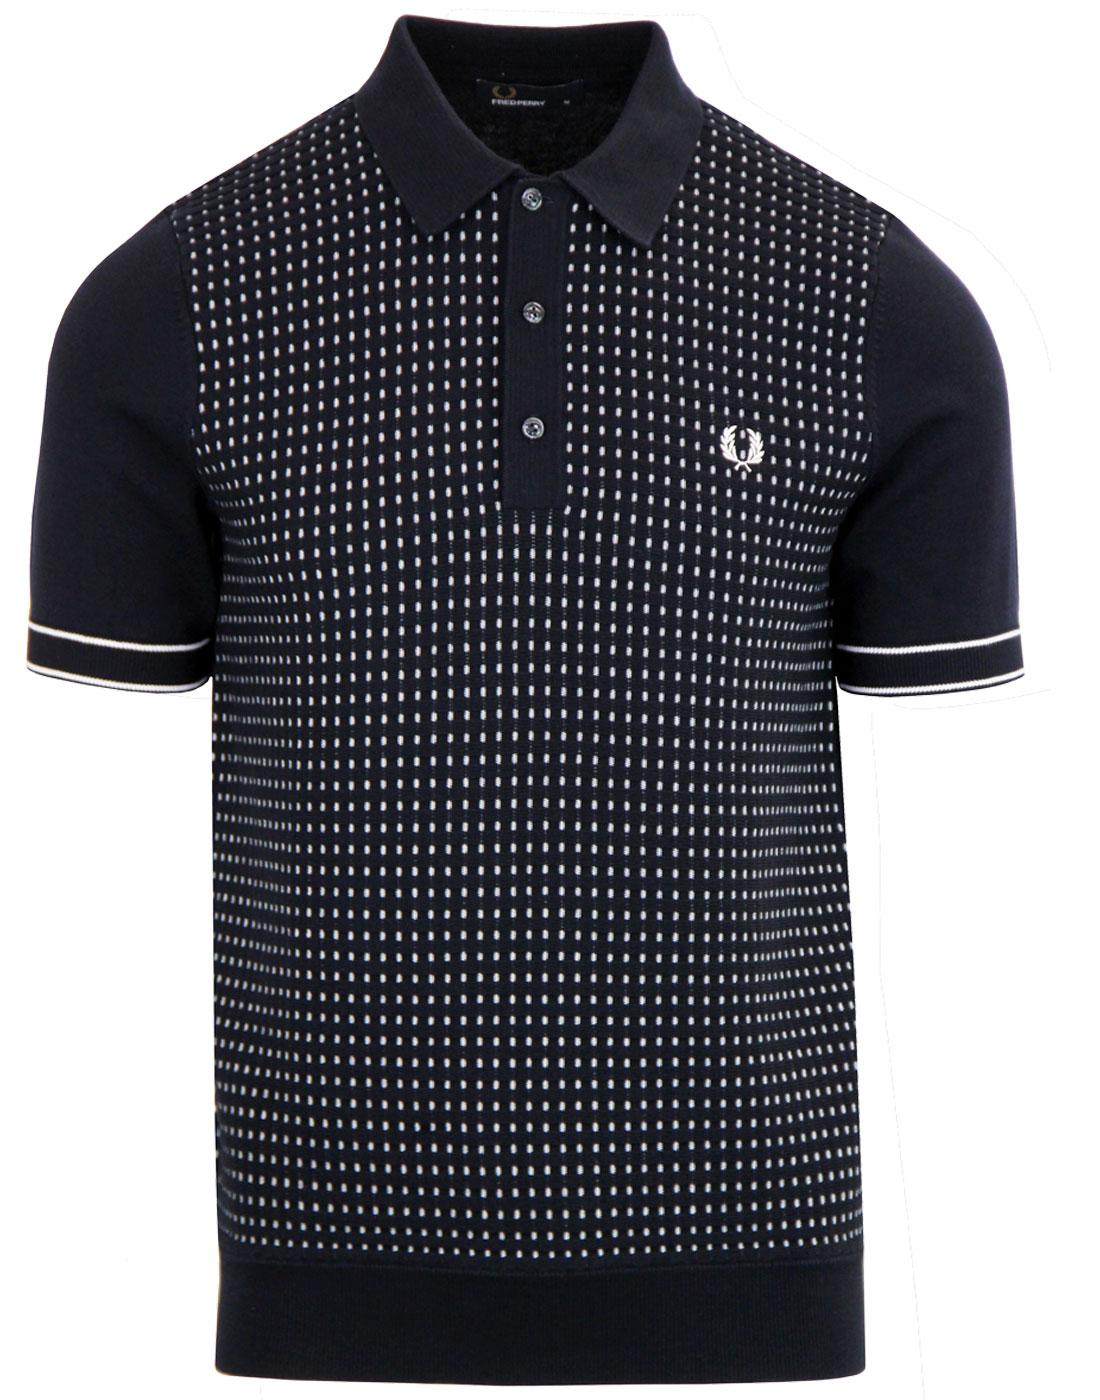 FRED PERRY Retro Mod Indie Jacquard Panel Polo